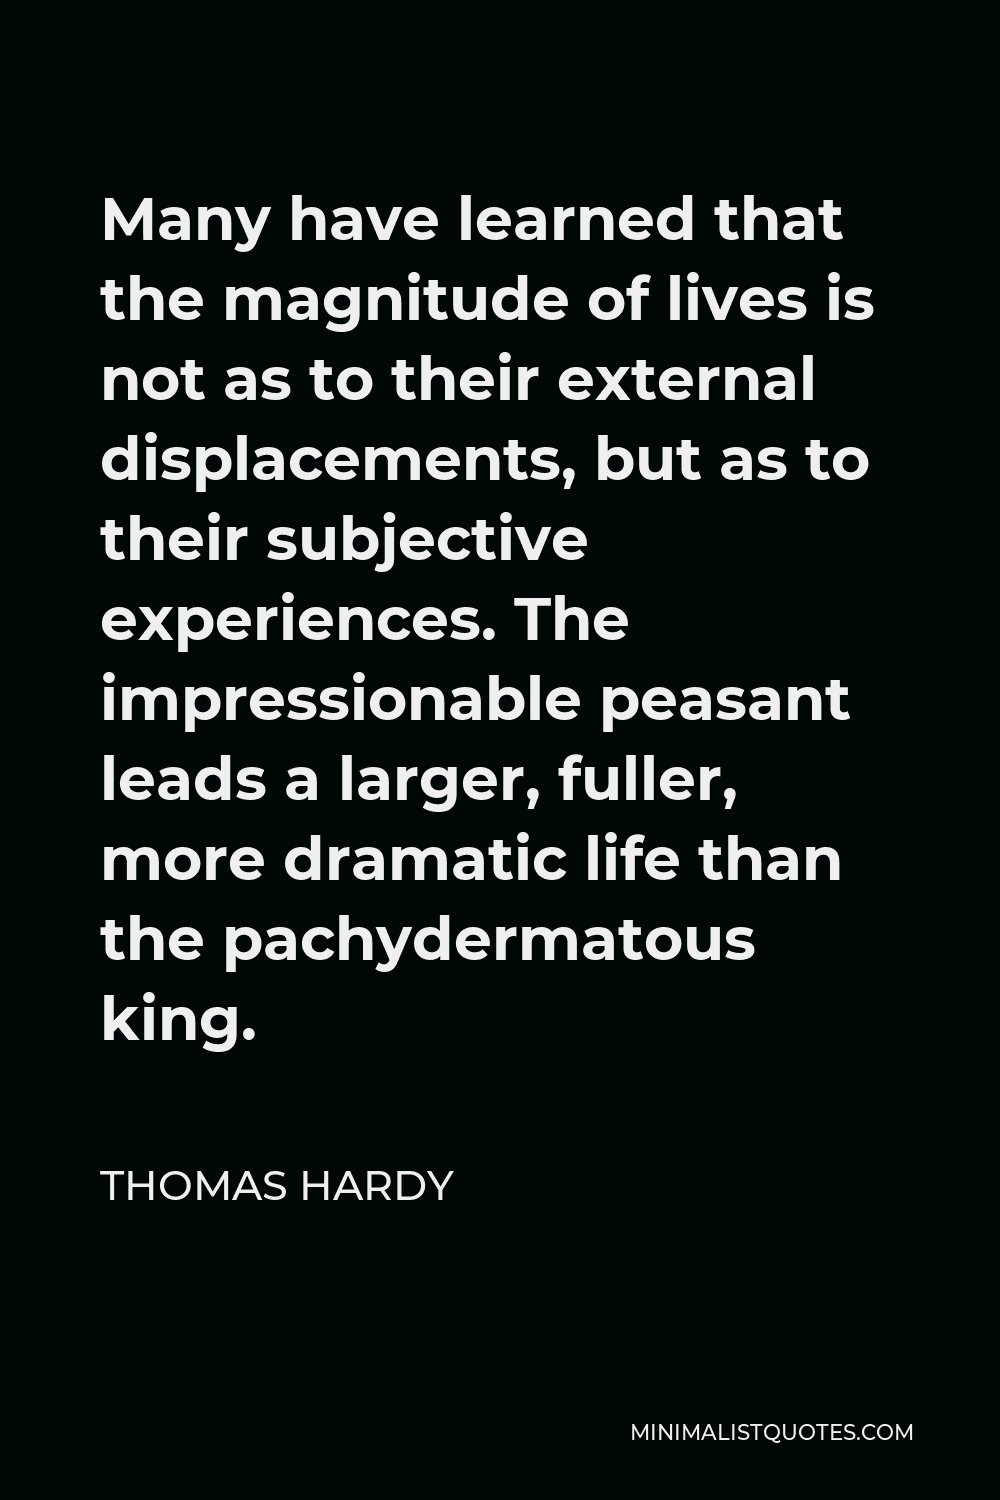 Thomas Hardy Quote - Many have learned that the magnitude of lives is not as to their external displacements, but as to their subjective experiences. The impressionable peasant leads a larger, fuller, more dramatic life than the pachydermatous king.